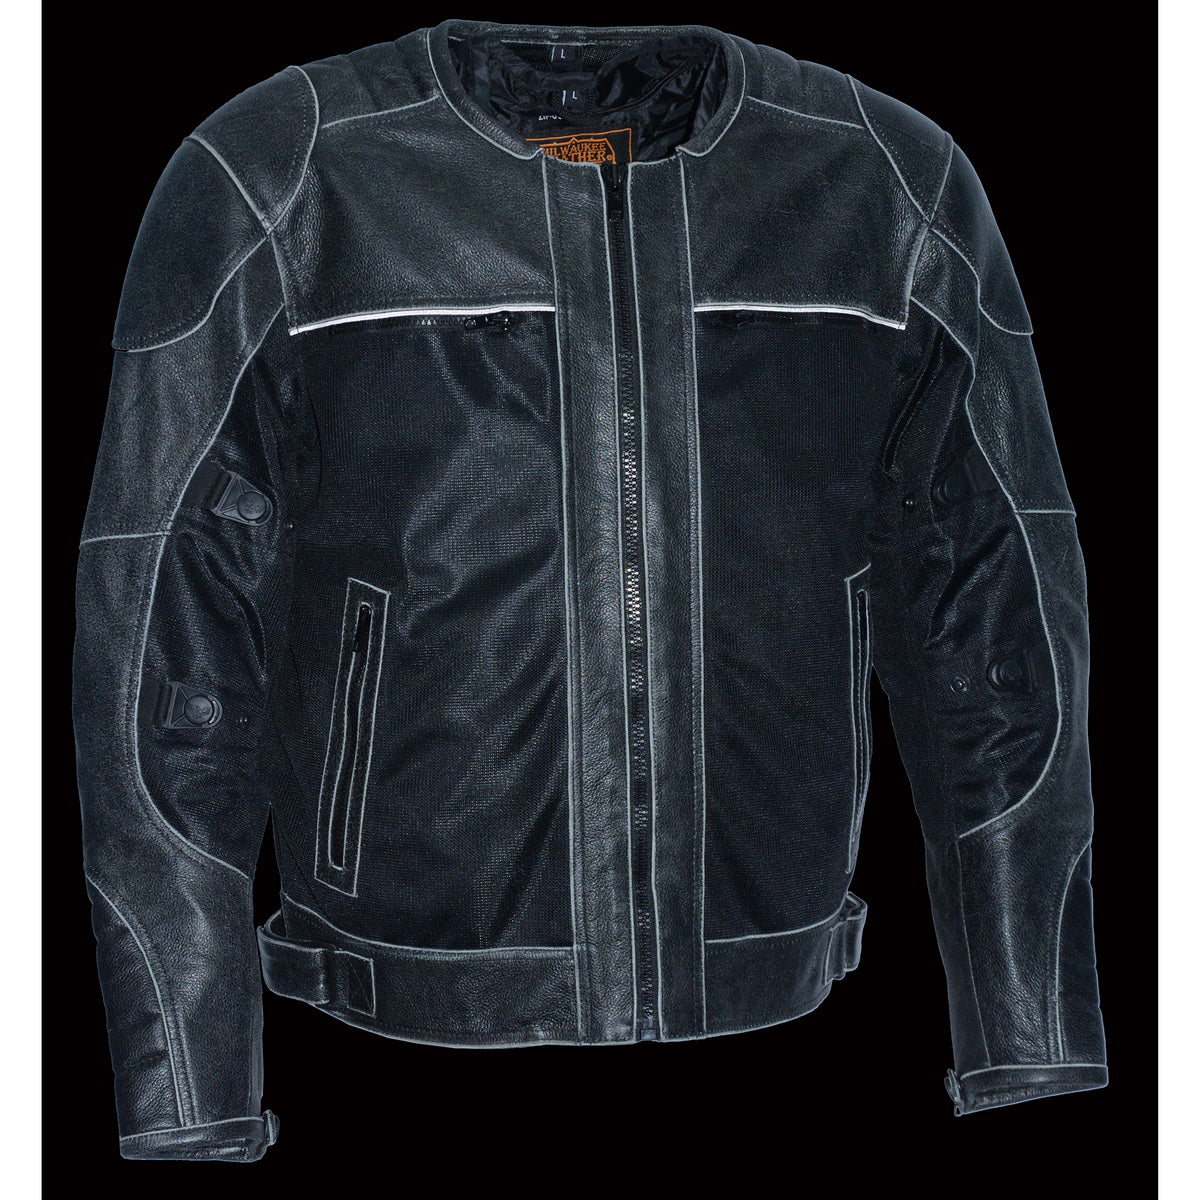 Milwaukee Leather MPM1796 Men's Armored Distressed Grey Leather and Mesh Racer Jacket